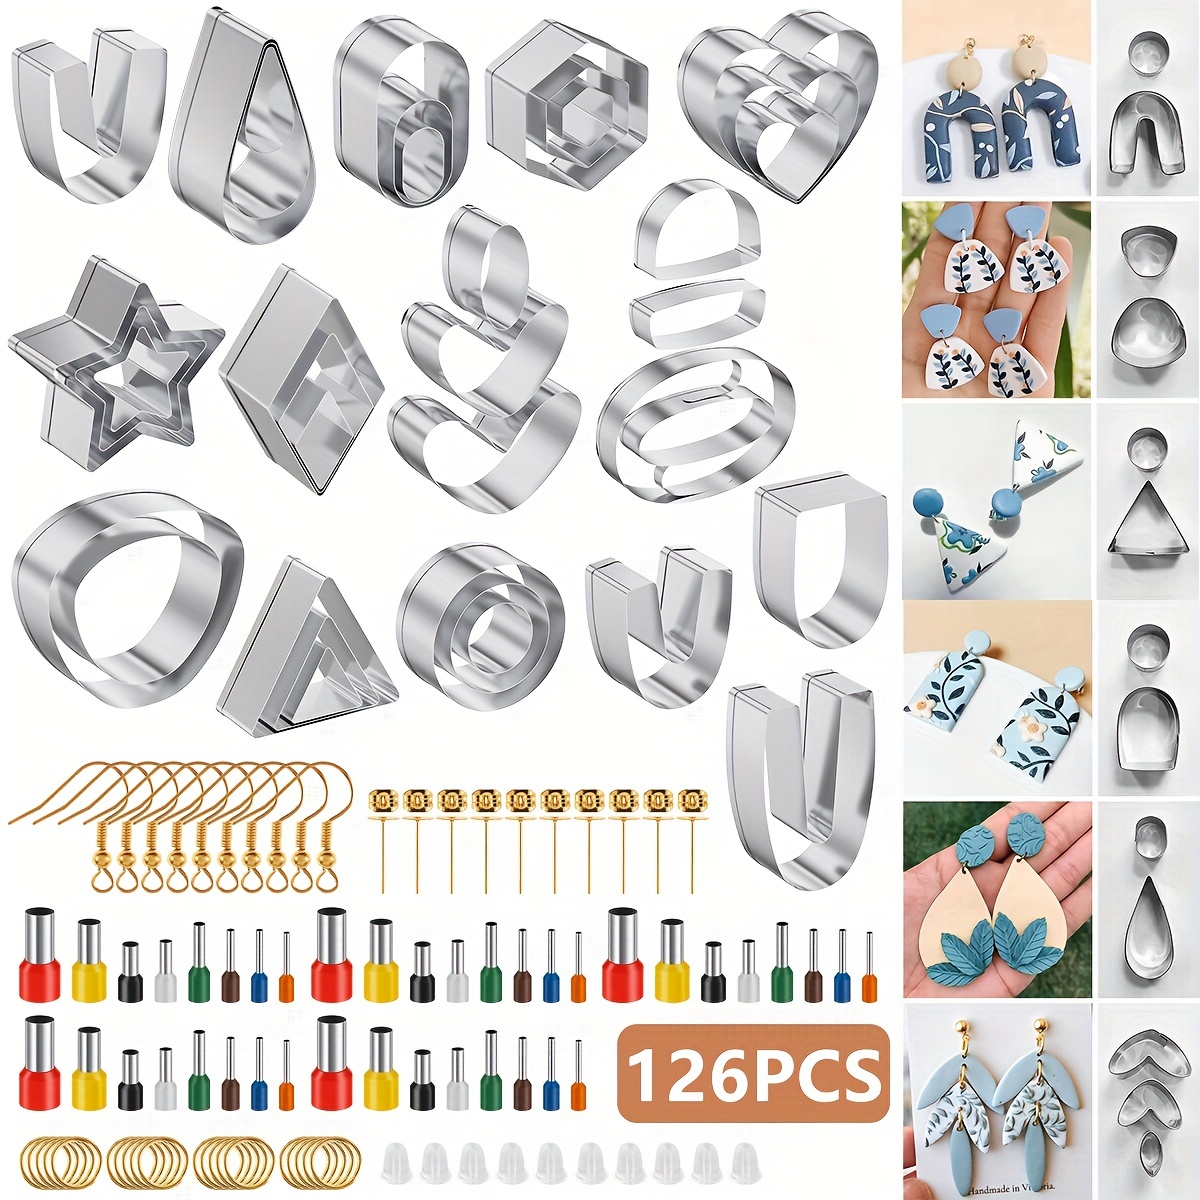 114 Pieces Cutters for Polymer Clay Earrings Clay Earring Cutter